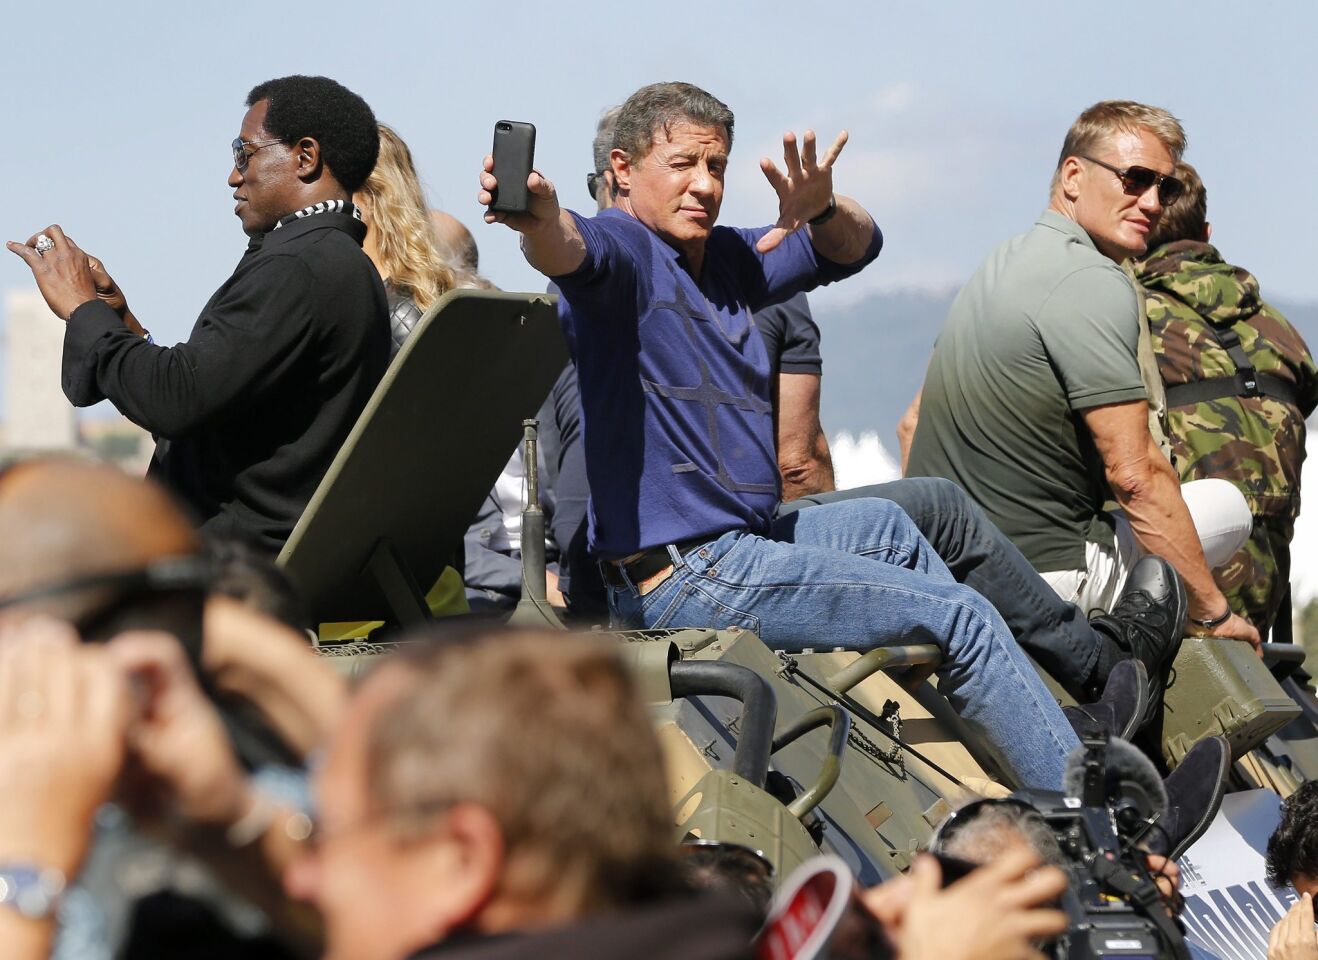 Sylvester Stallone, center, takes a selfie as he arrives on a tank for a photocall for "The Expendables 3" at the 67th annual Cannes Film Festival in Cannes, France, on May 18, 2014.